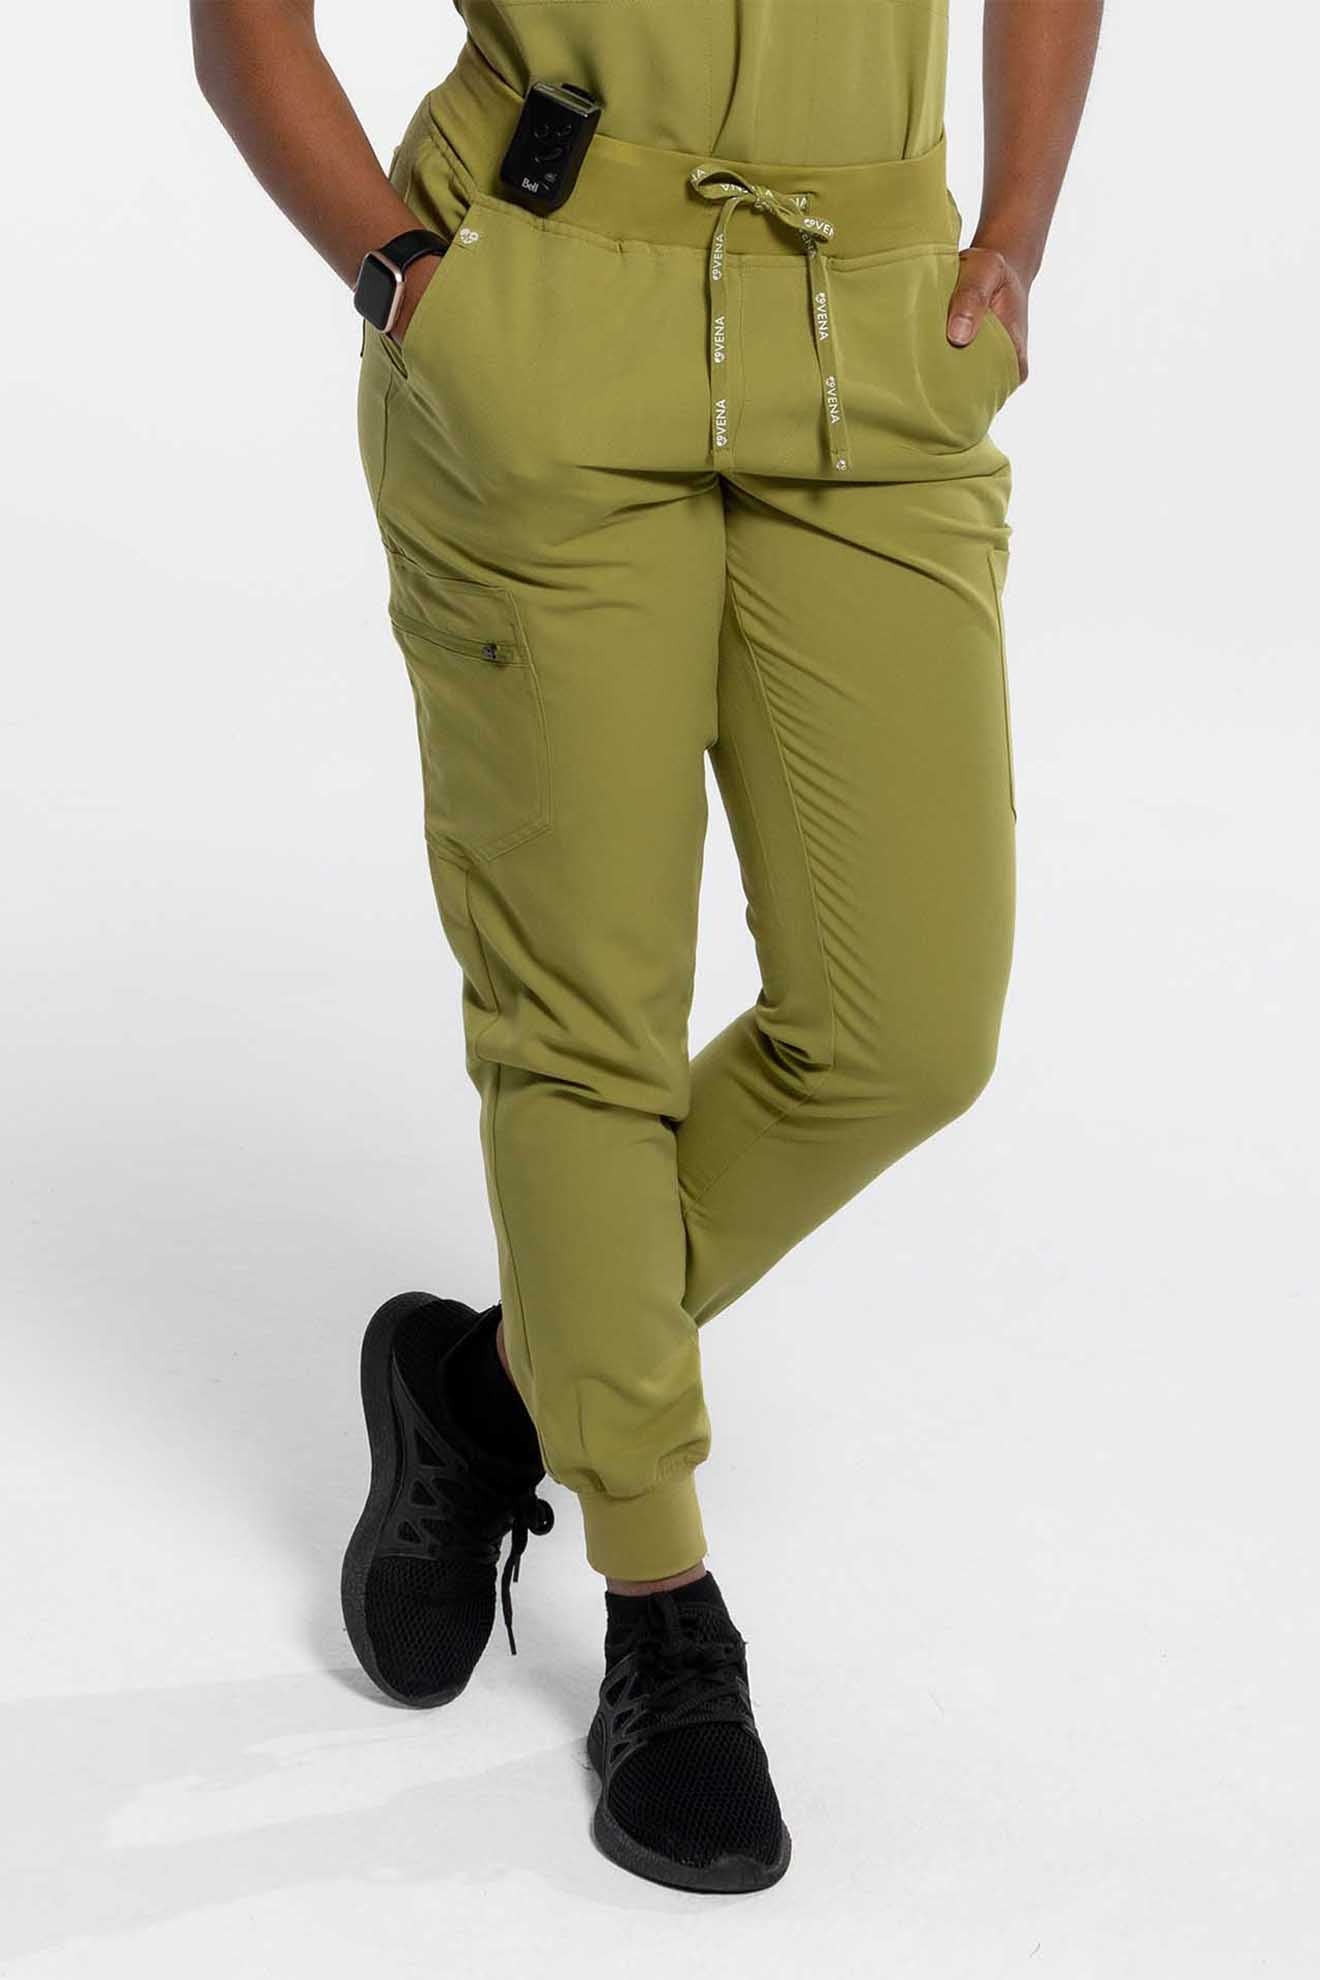 Women's SAYA Jogger Scrub Pant in olive colour featuring front angle shot #colour_olive